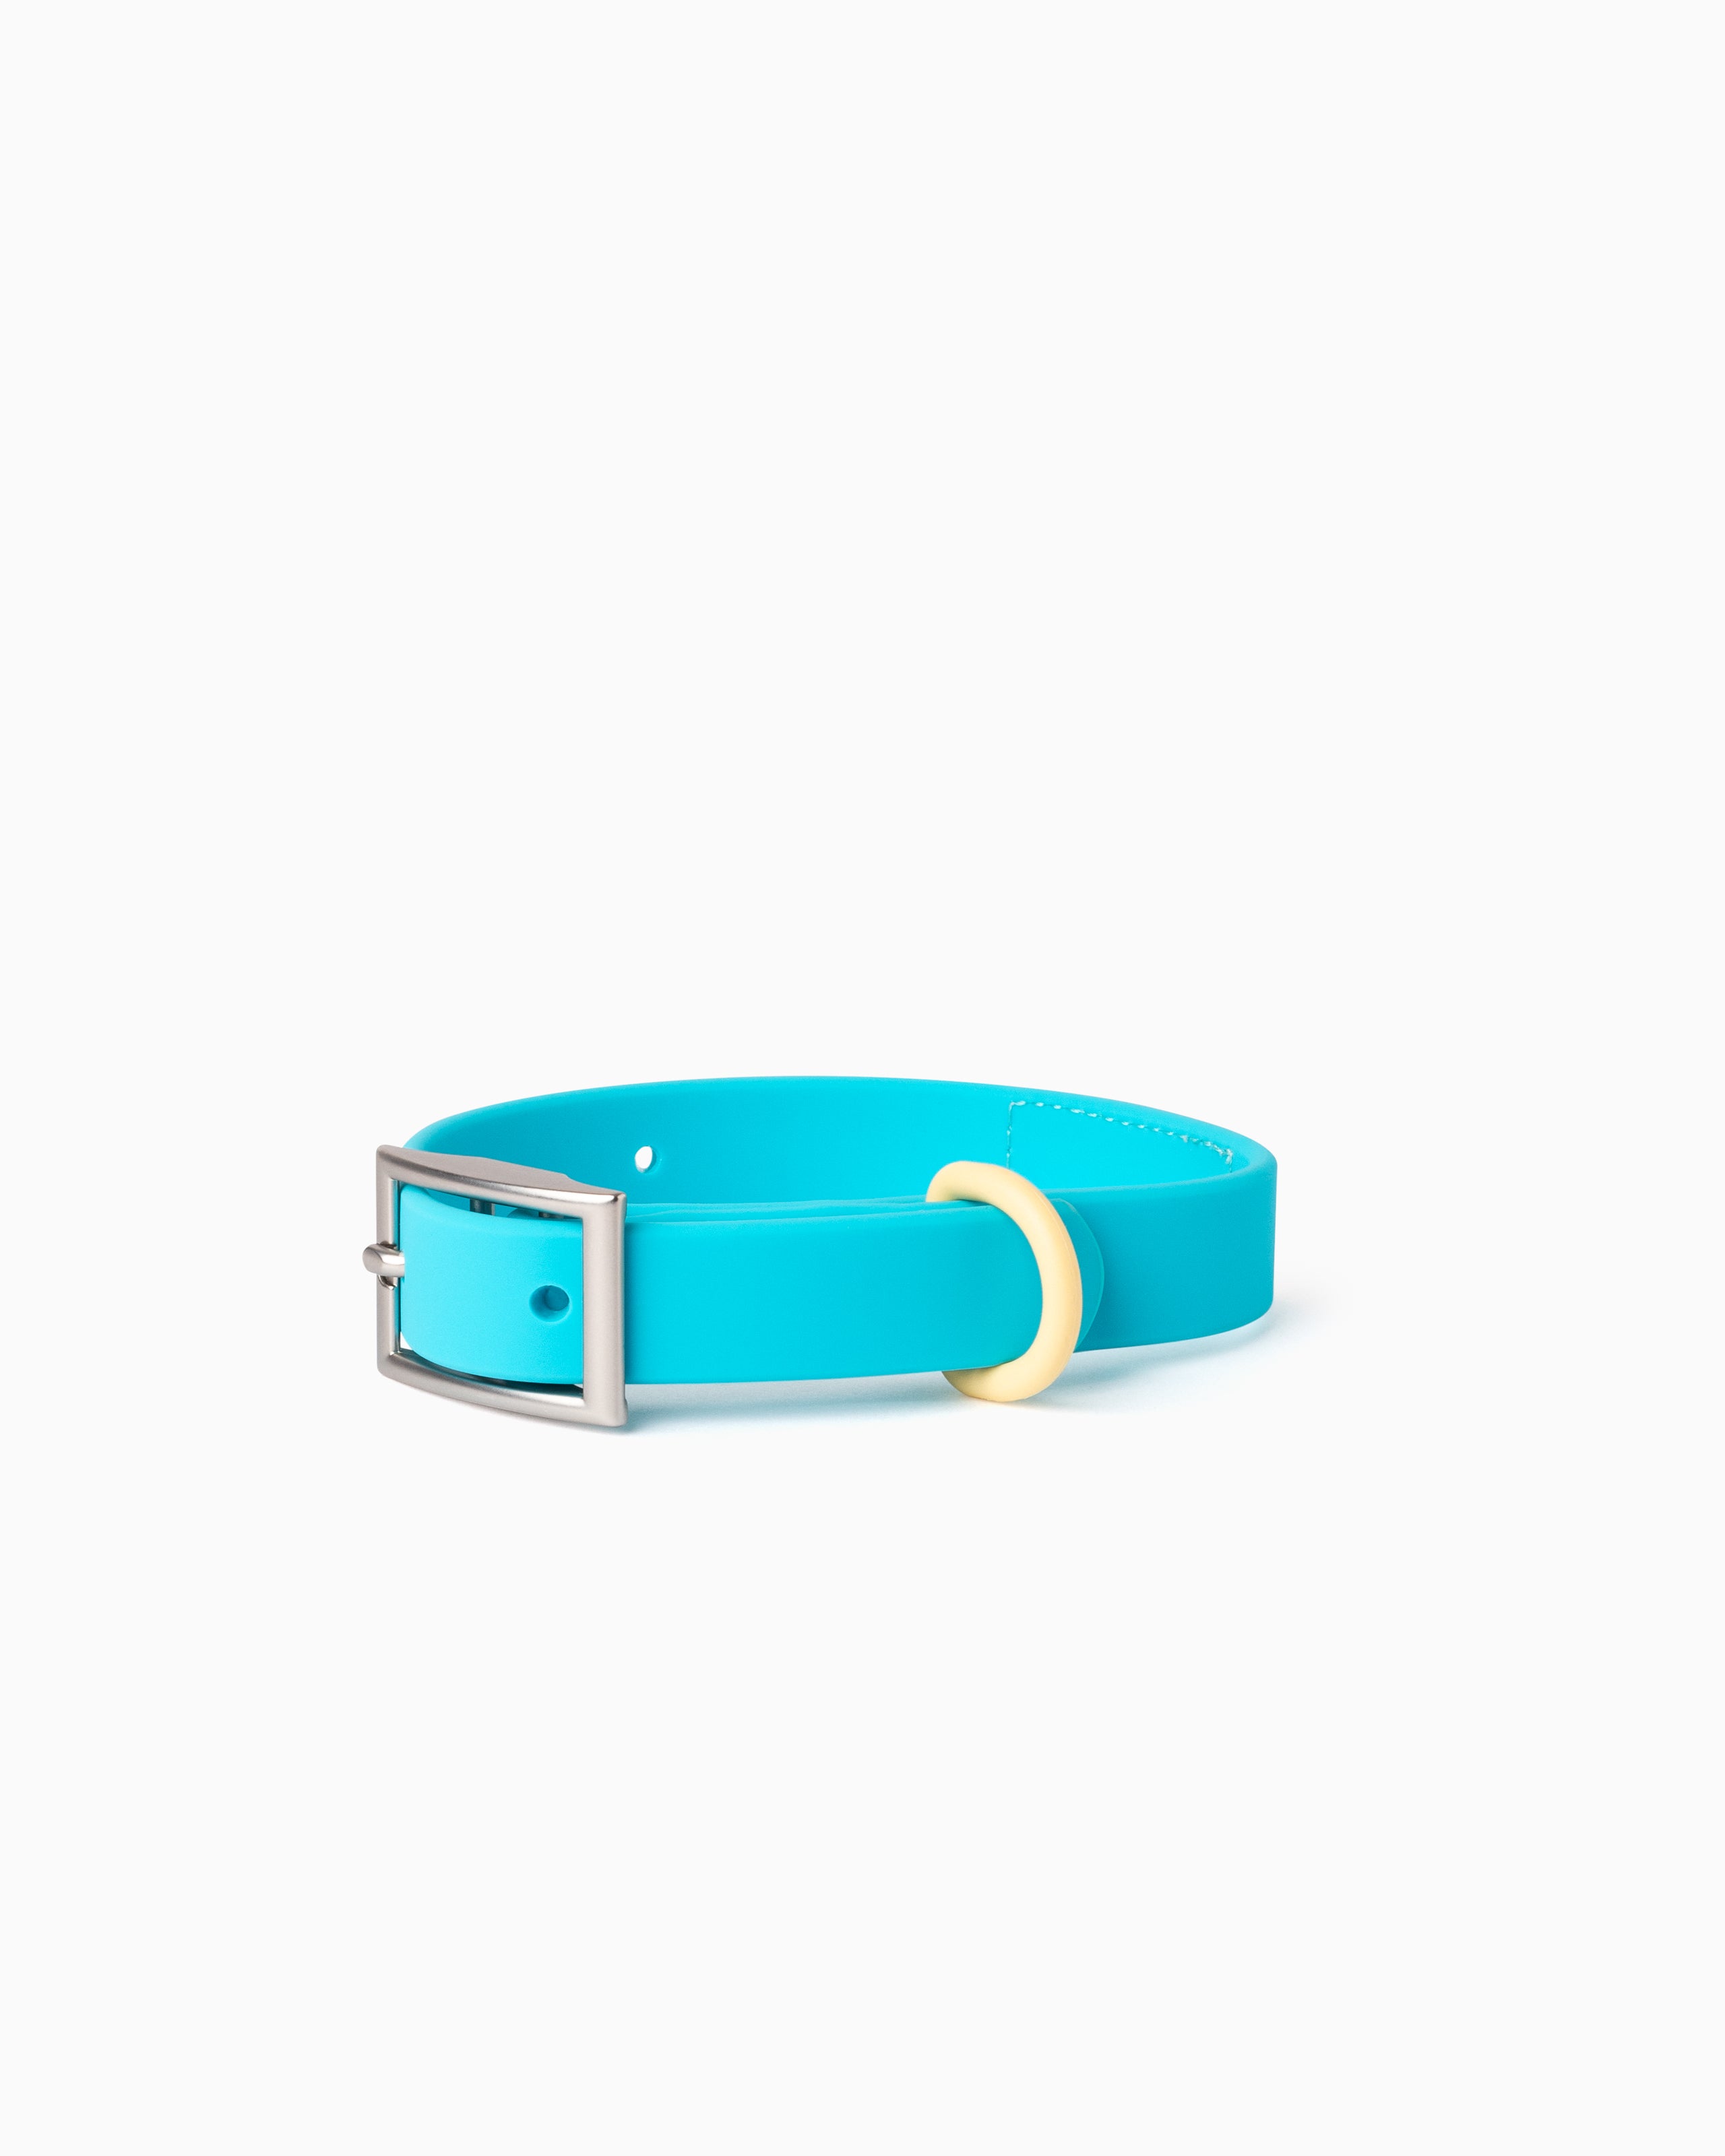 Cyan blue waterproof and odor resistant dog collar with a two tone color block design & zinc alloy buckle fastening.